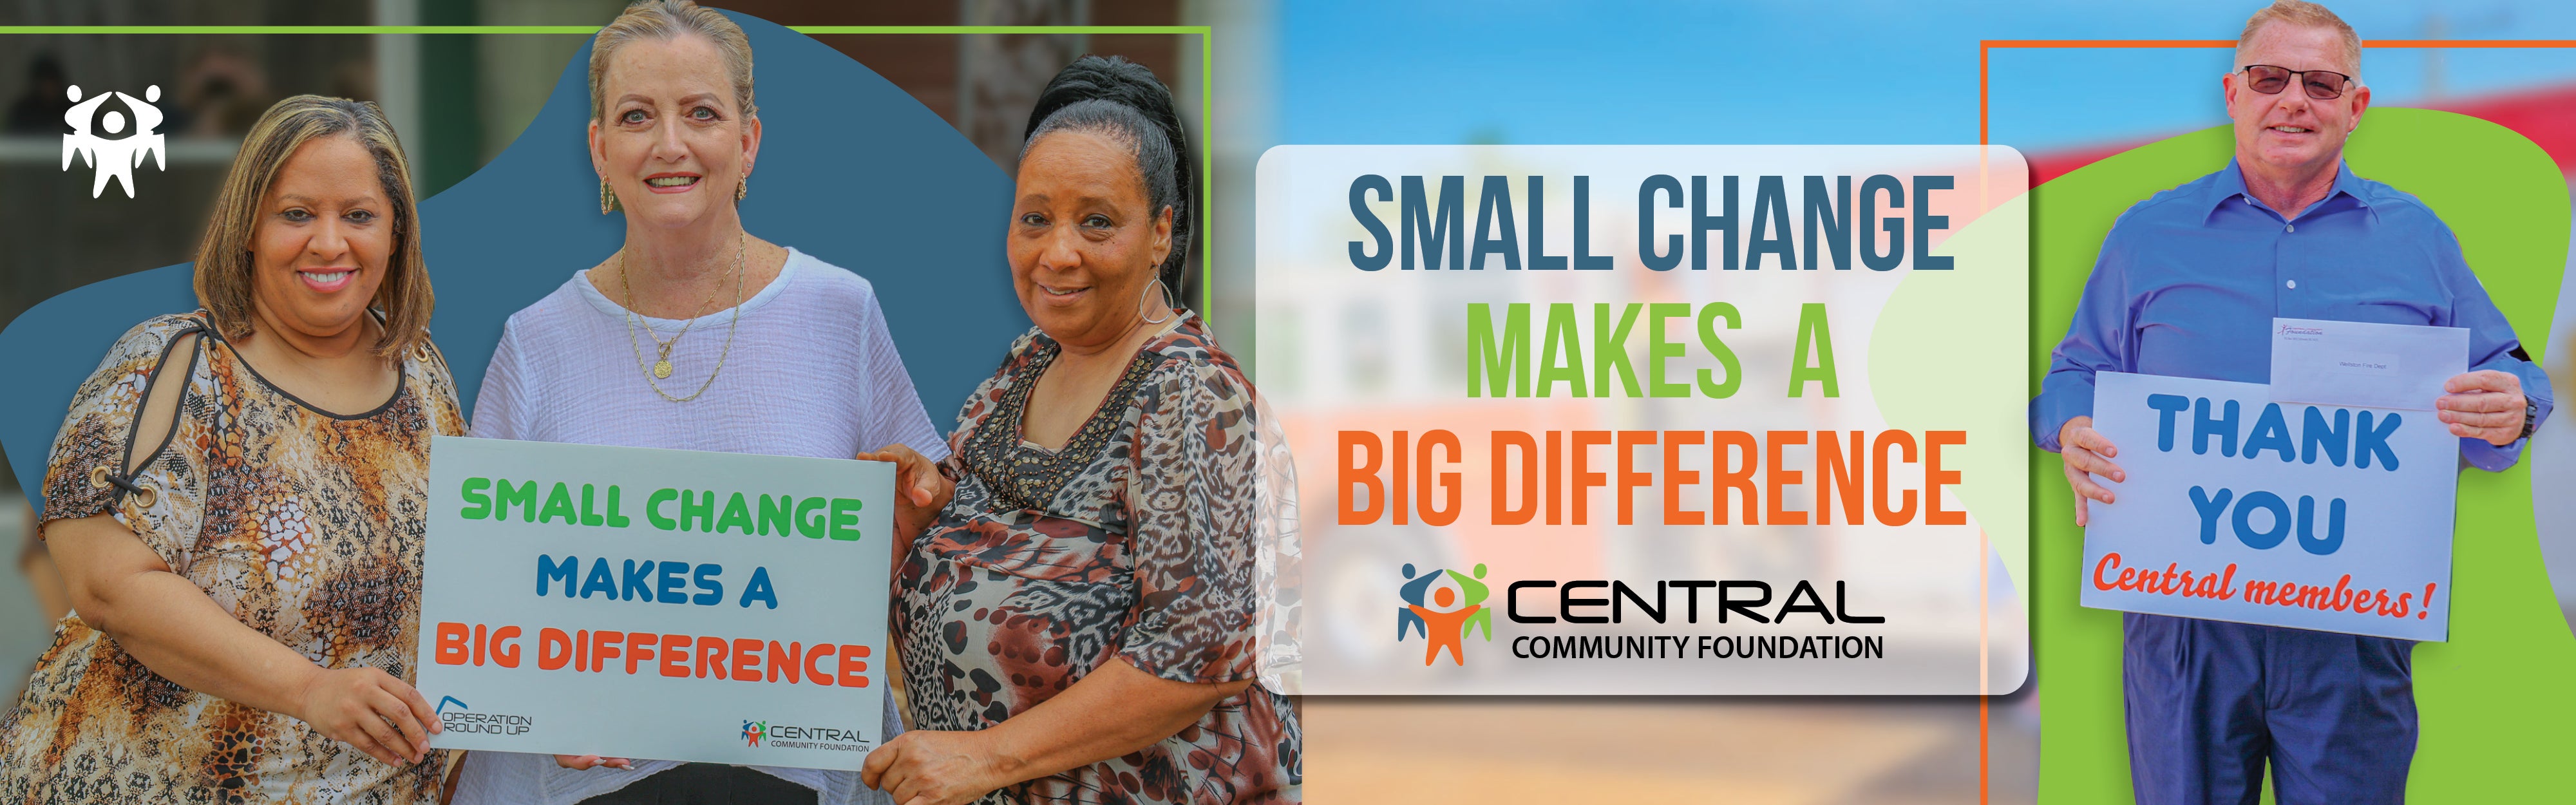 Small Change makes a big difference. Central Community Foundation. 